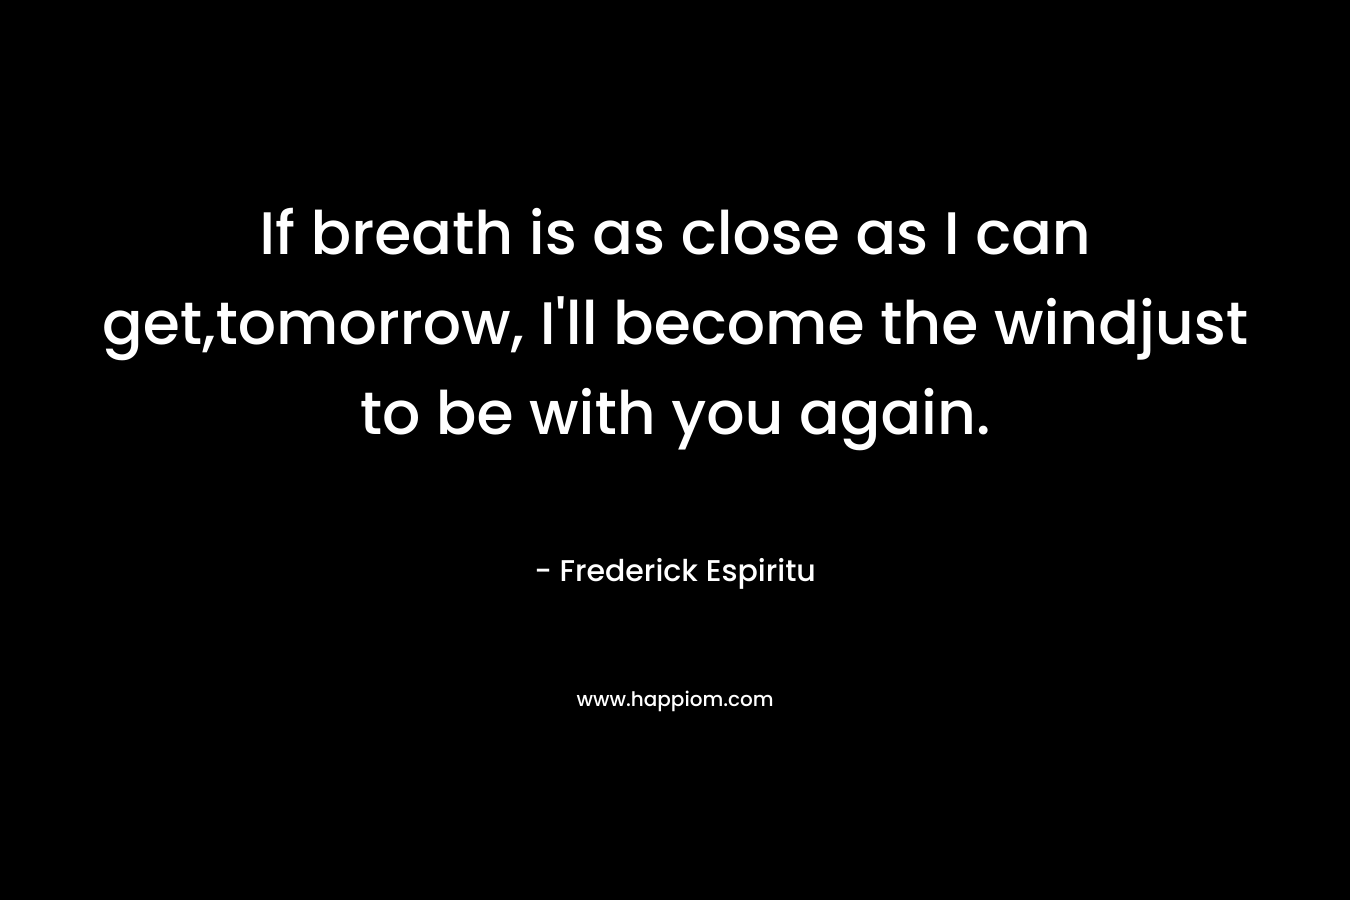 If breath is as close as I can get,tomorrow, I’ll become the windjust to be with you again. – Frederick Espiritu